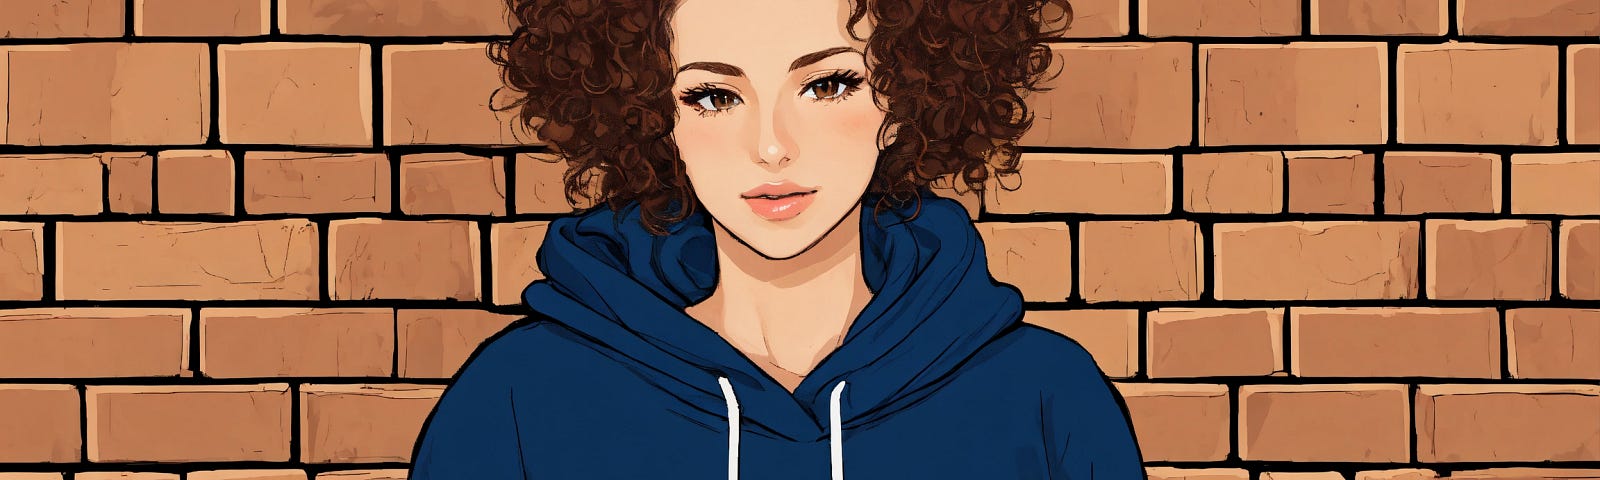 graphic illustration woman with light brown eyes, curly messy bun light brown hair, holding a sparkly white tumbler and wearing a navy blue hoodie sweatshirt that says Mama, sitting against a brick wall background. The brick wall has a laptop, a heat press, a couple of tumblers sitting on it illustration drawing.